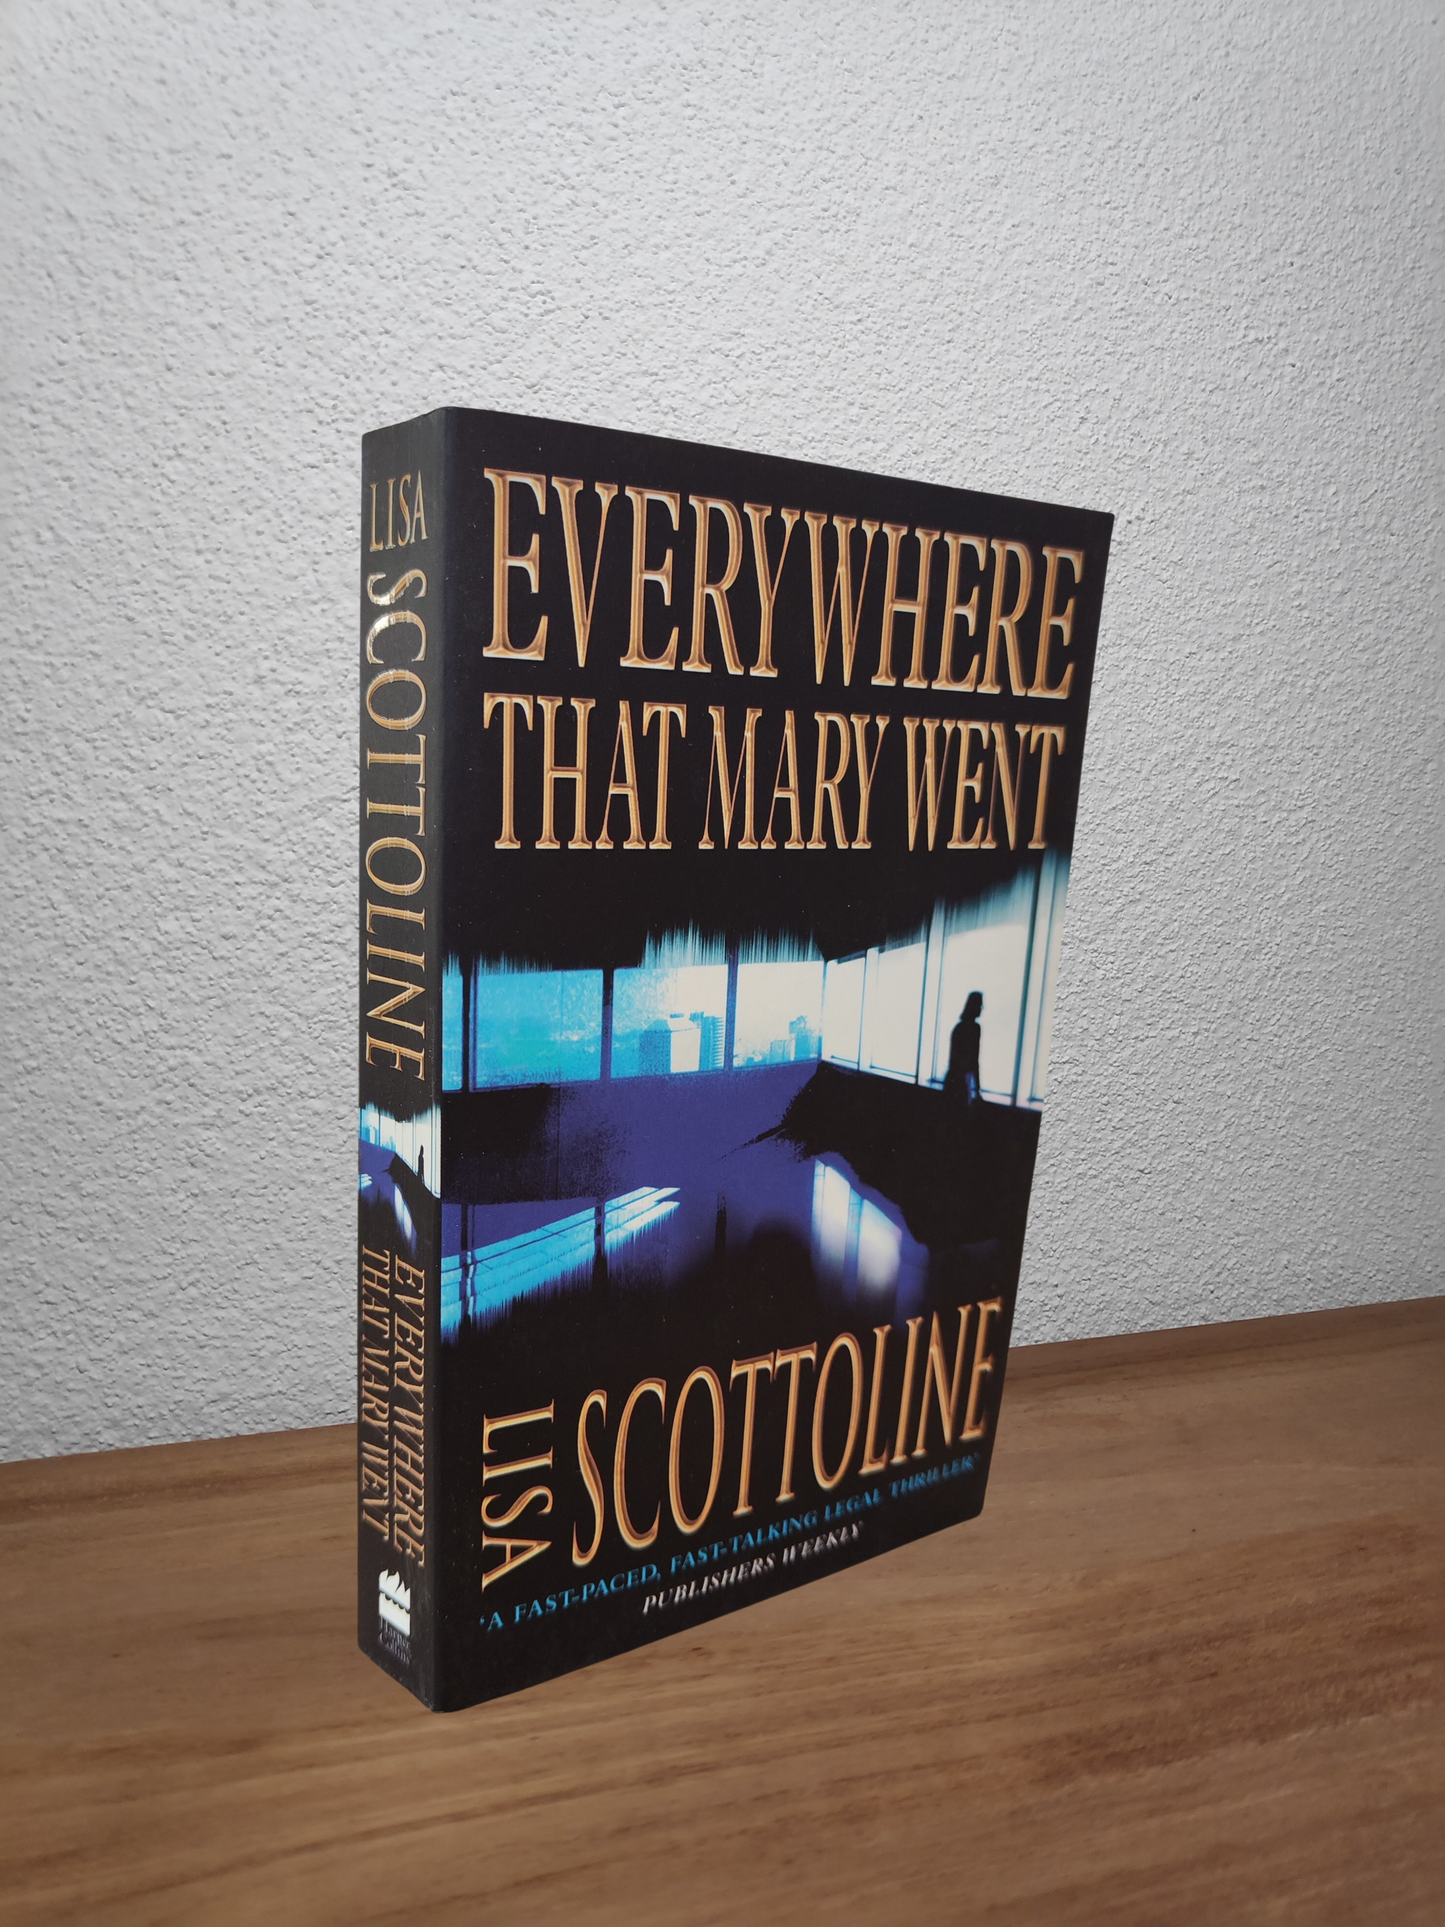 Lisa Scottoline - Everywhere That Mary Went (Rosato and Associates #1)